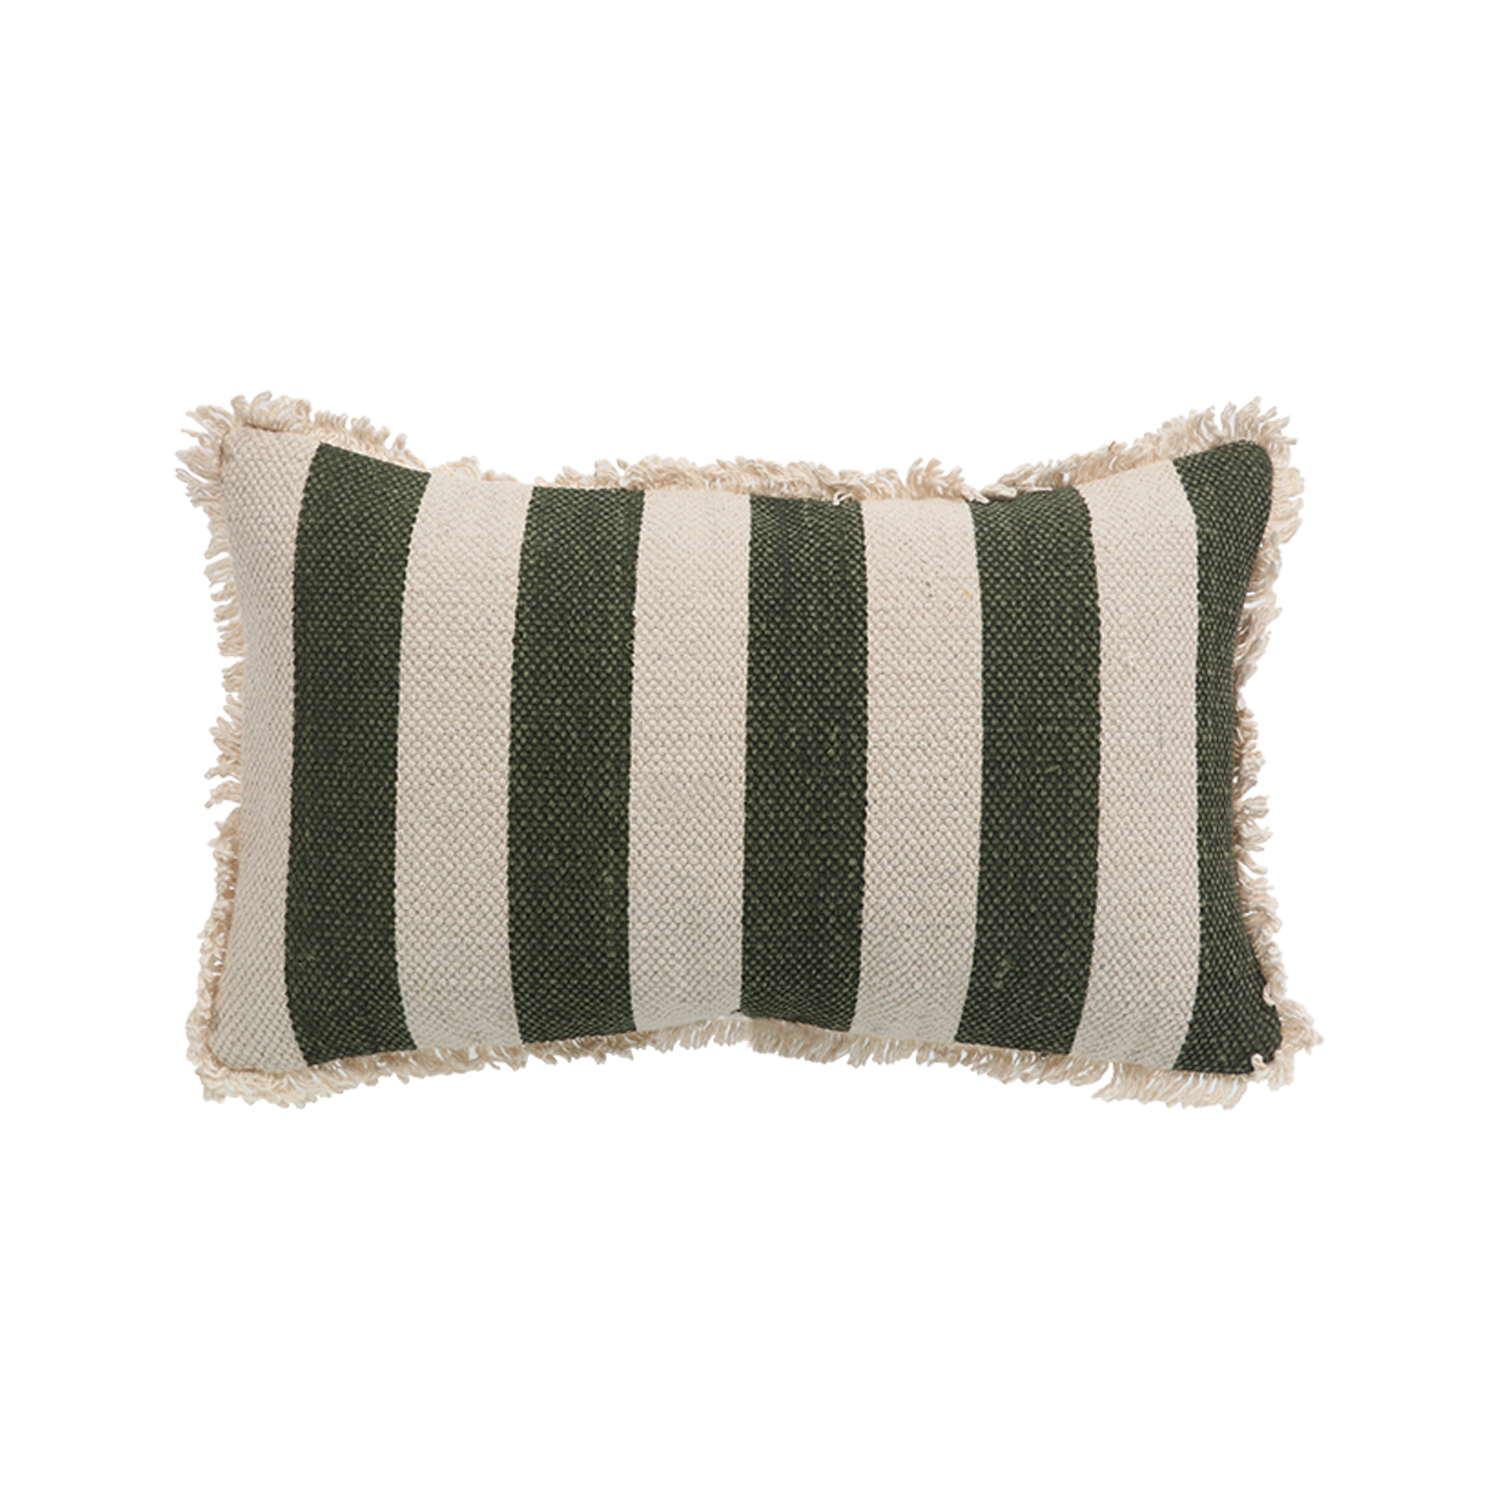 Printed Stripe Dark Green  Cushions Covers with fringes 12X20 Inch